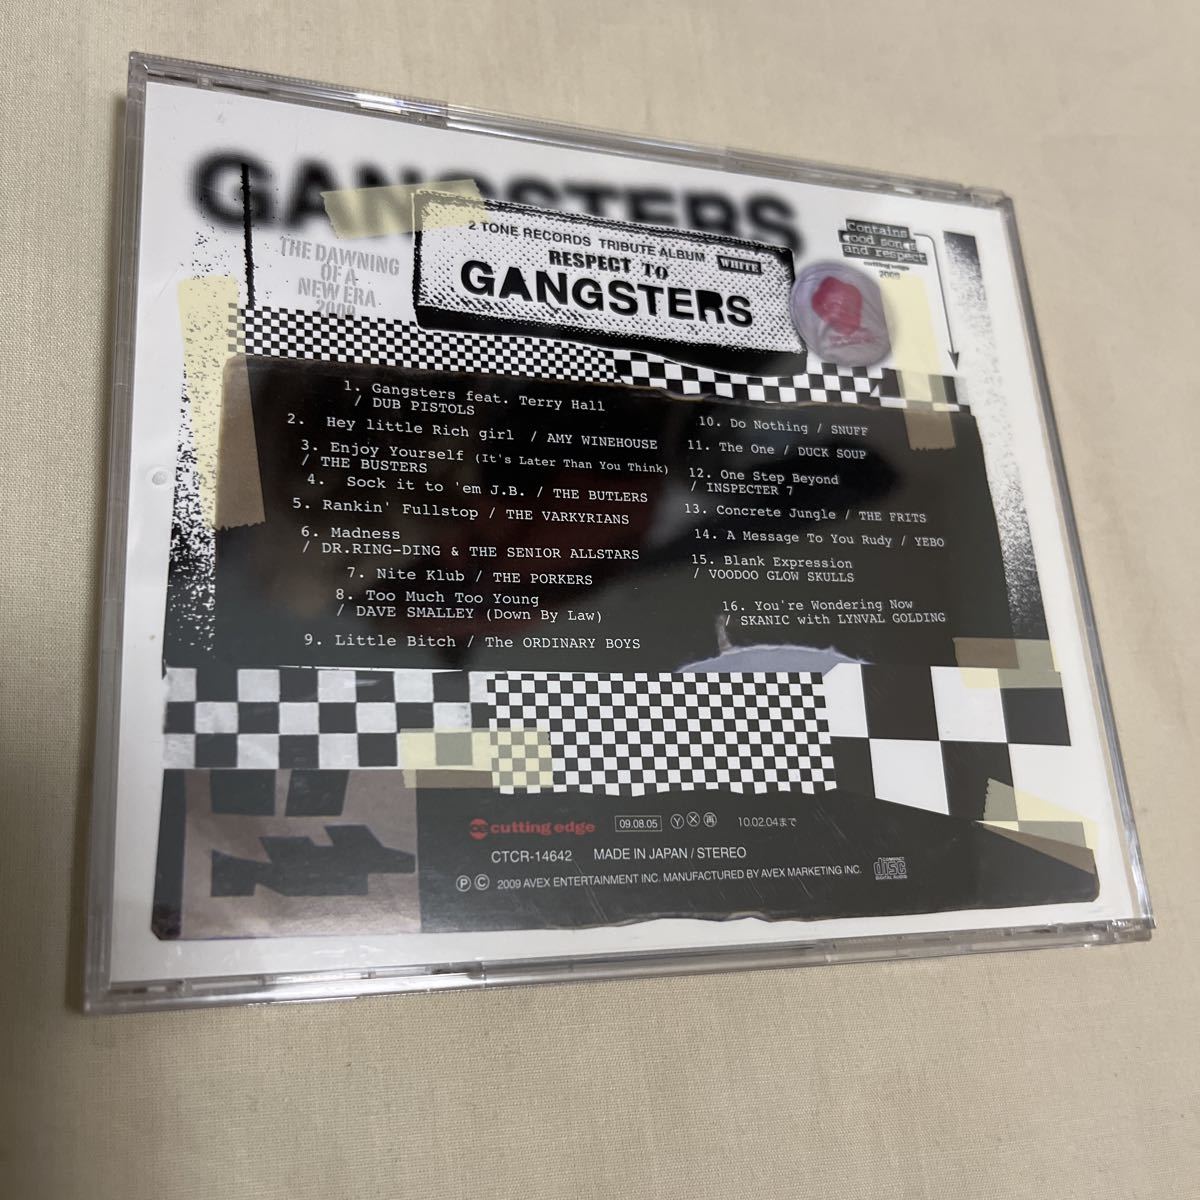 CD 2TONE RECORDS TRIBUTE ALBUM WHITE～RESPECT TO GANGSTERS～の画像2